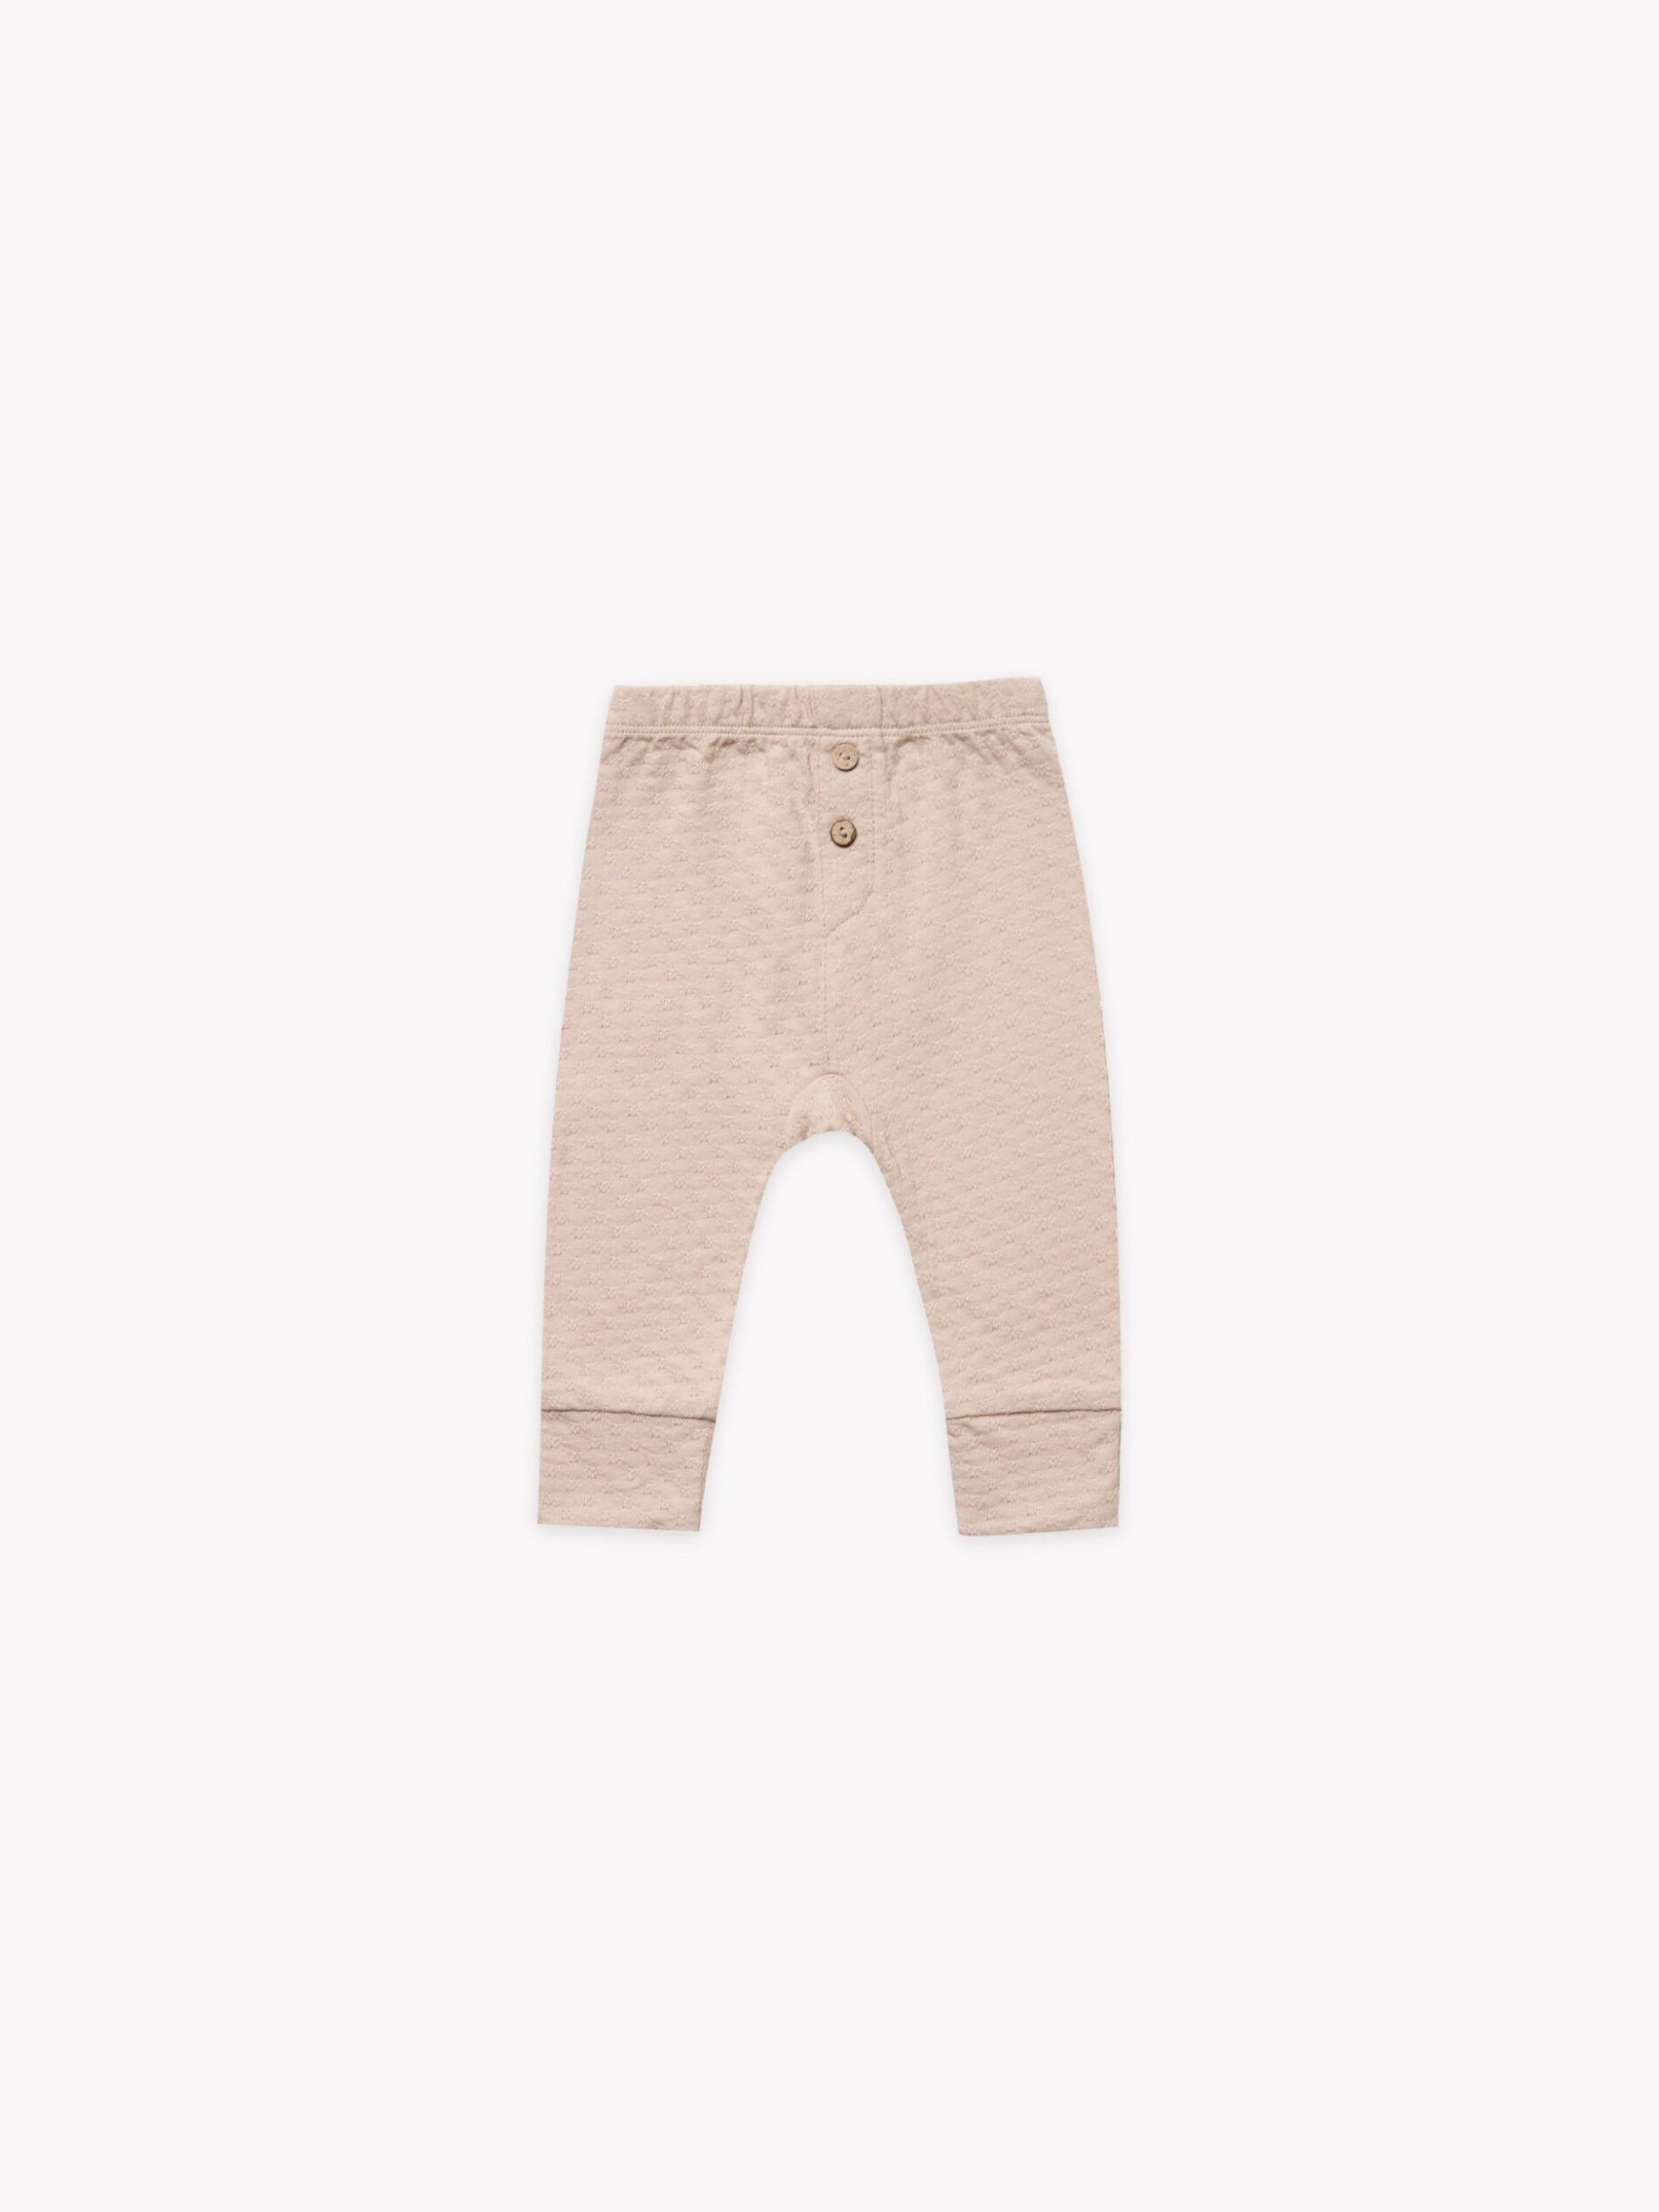 https://www.blossom.baby/wp-content/uploads/2020/12/Quincy-Mae-Pointelle-Pant-Petal-Pink-Baby-Pants-Petal-Colored-Pointelle-Pants-by-Quincy-Mae-scaled-1.jpg